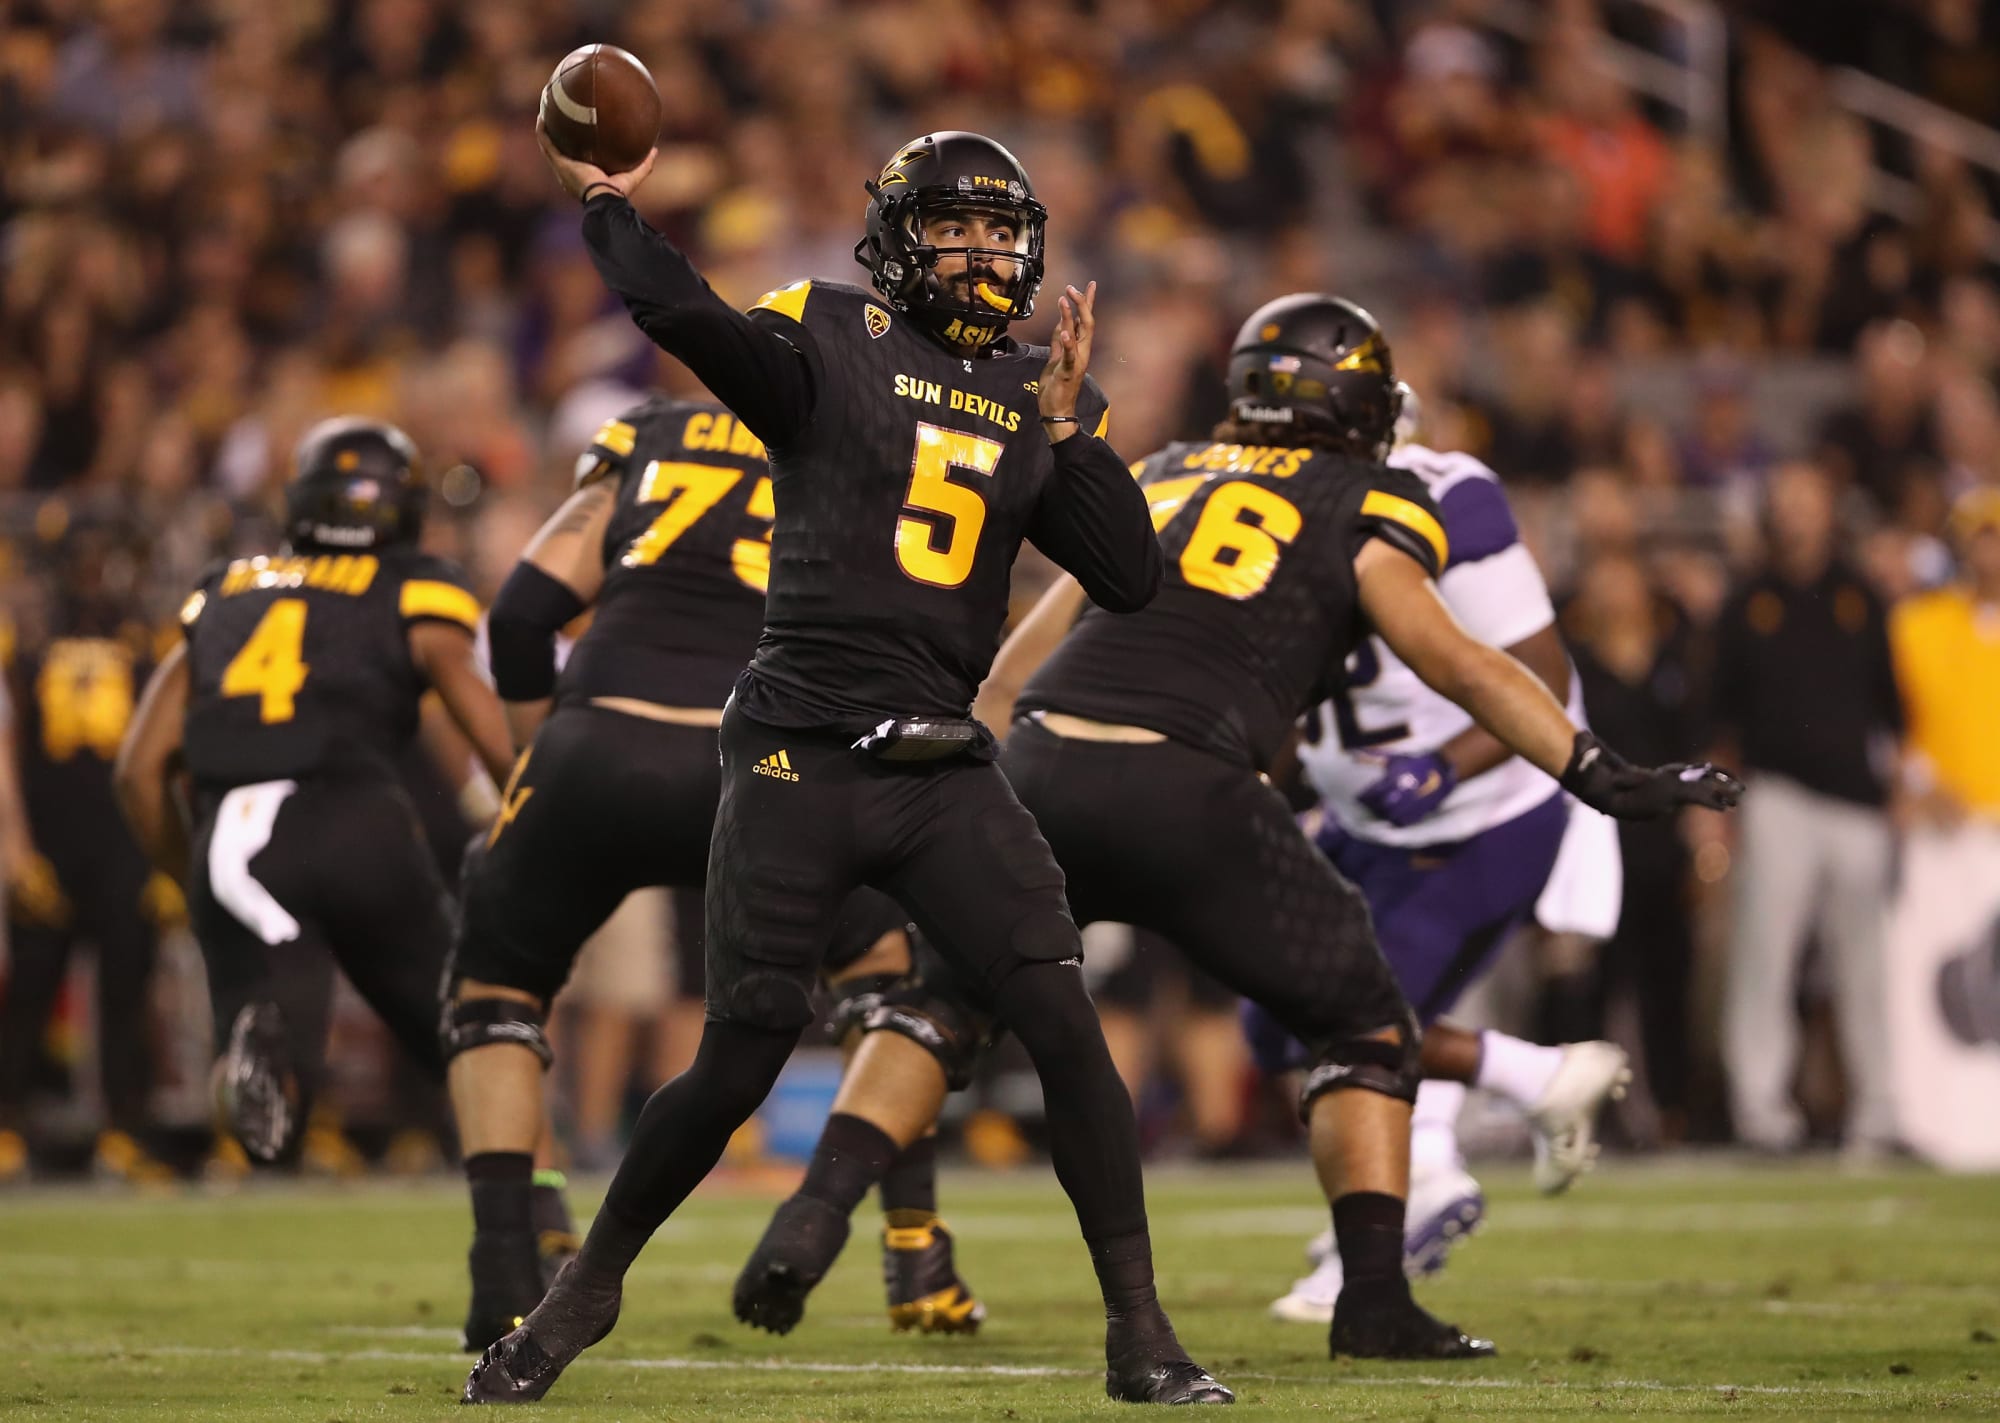 Arizona State Football Uniforms Bring the Heat to the Field